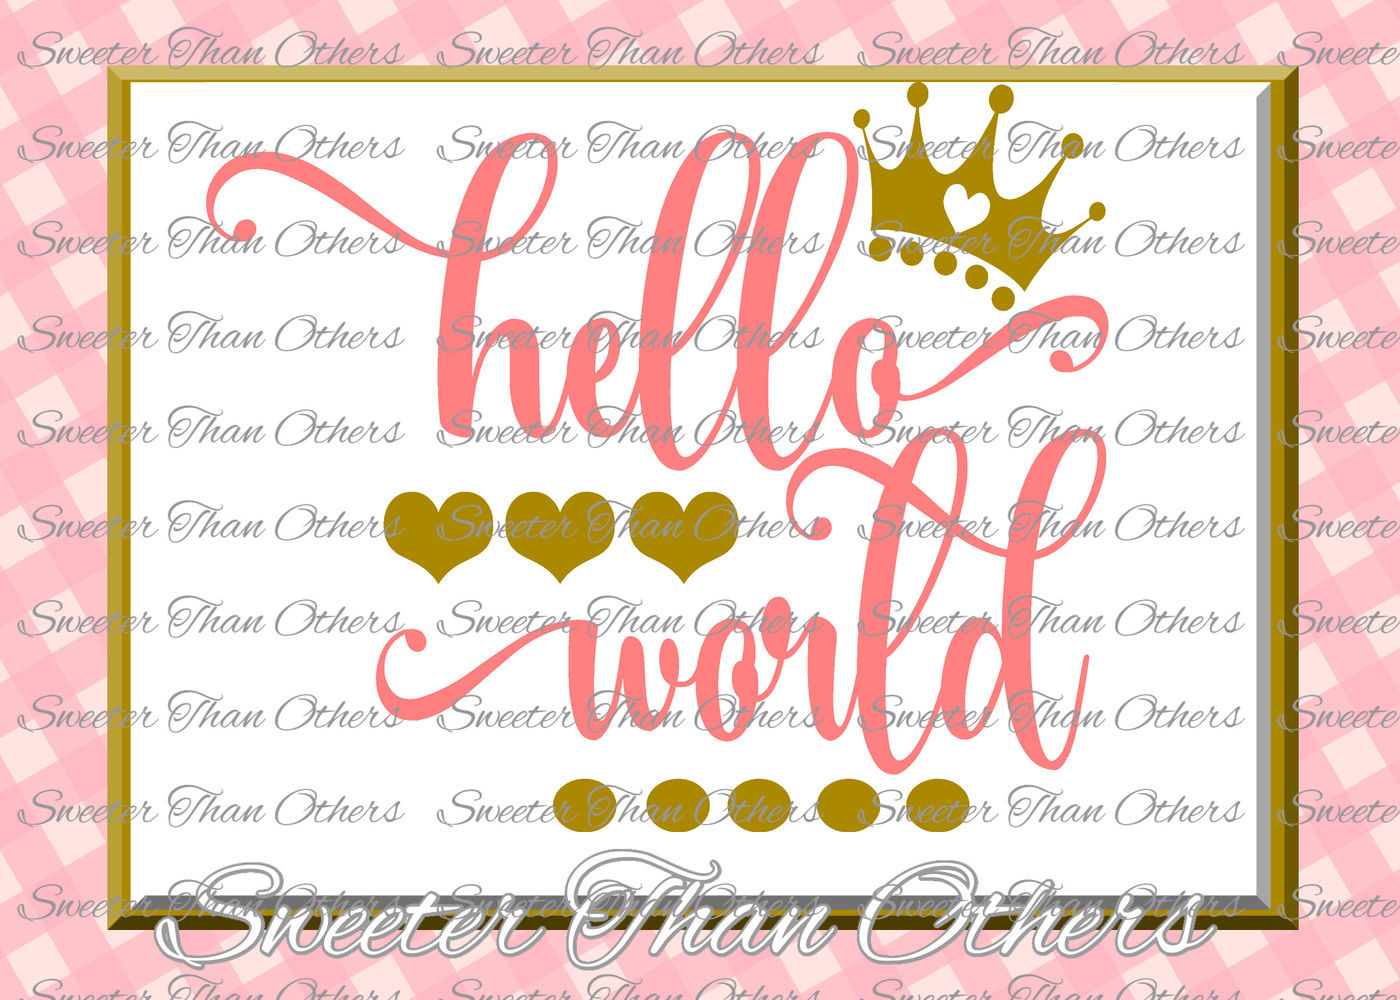 Download Hello World Svg Baby Svg Baby Cut File Baby Cutting File Dxf Silhouette Cricut Instant Download Vinyl Design Htv Scal Mtc By Sweeter Than Others Thehungryjpeg Com